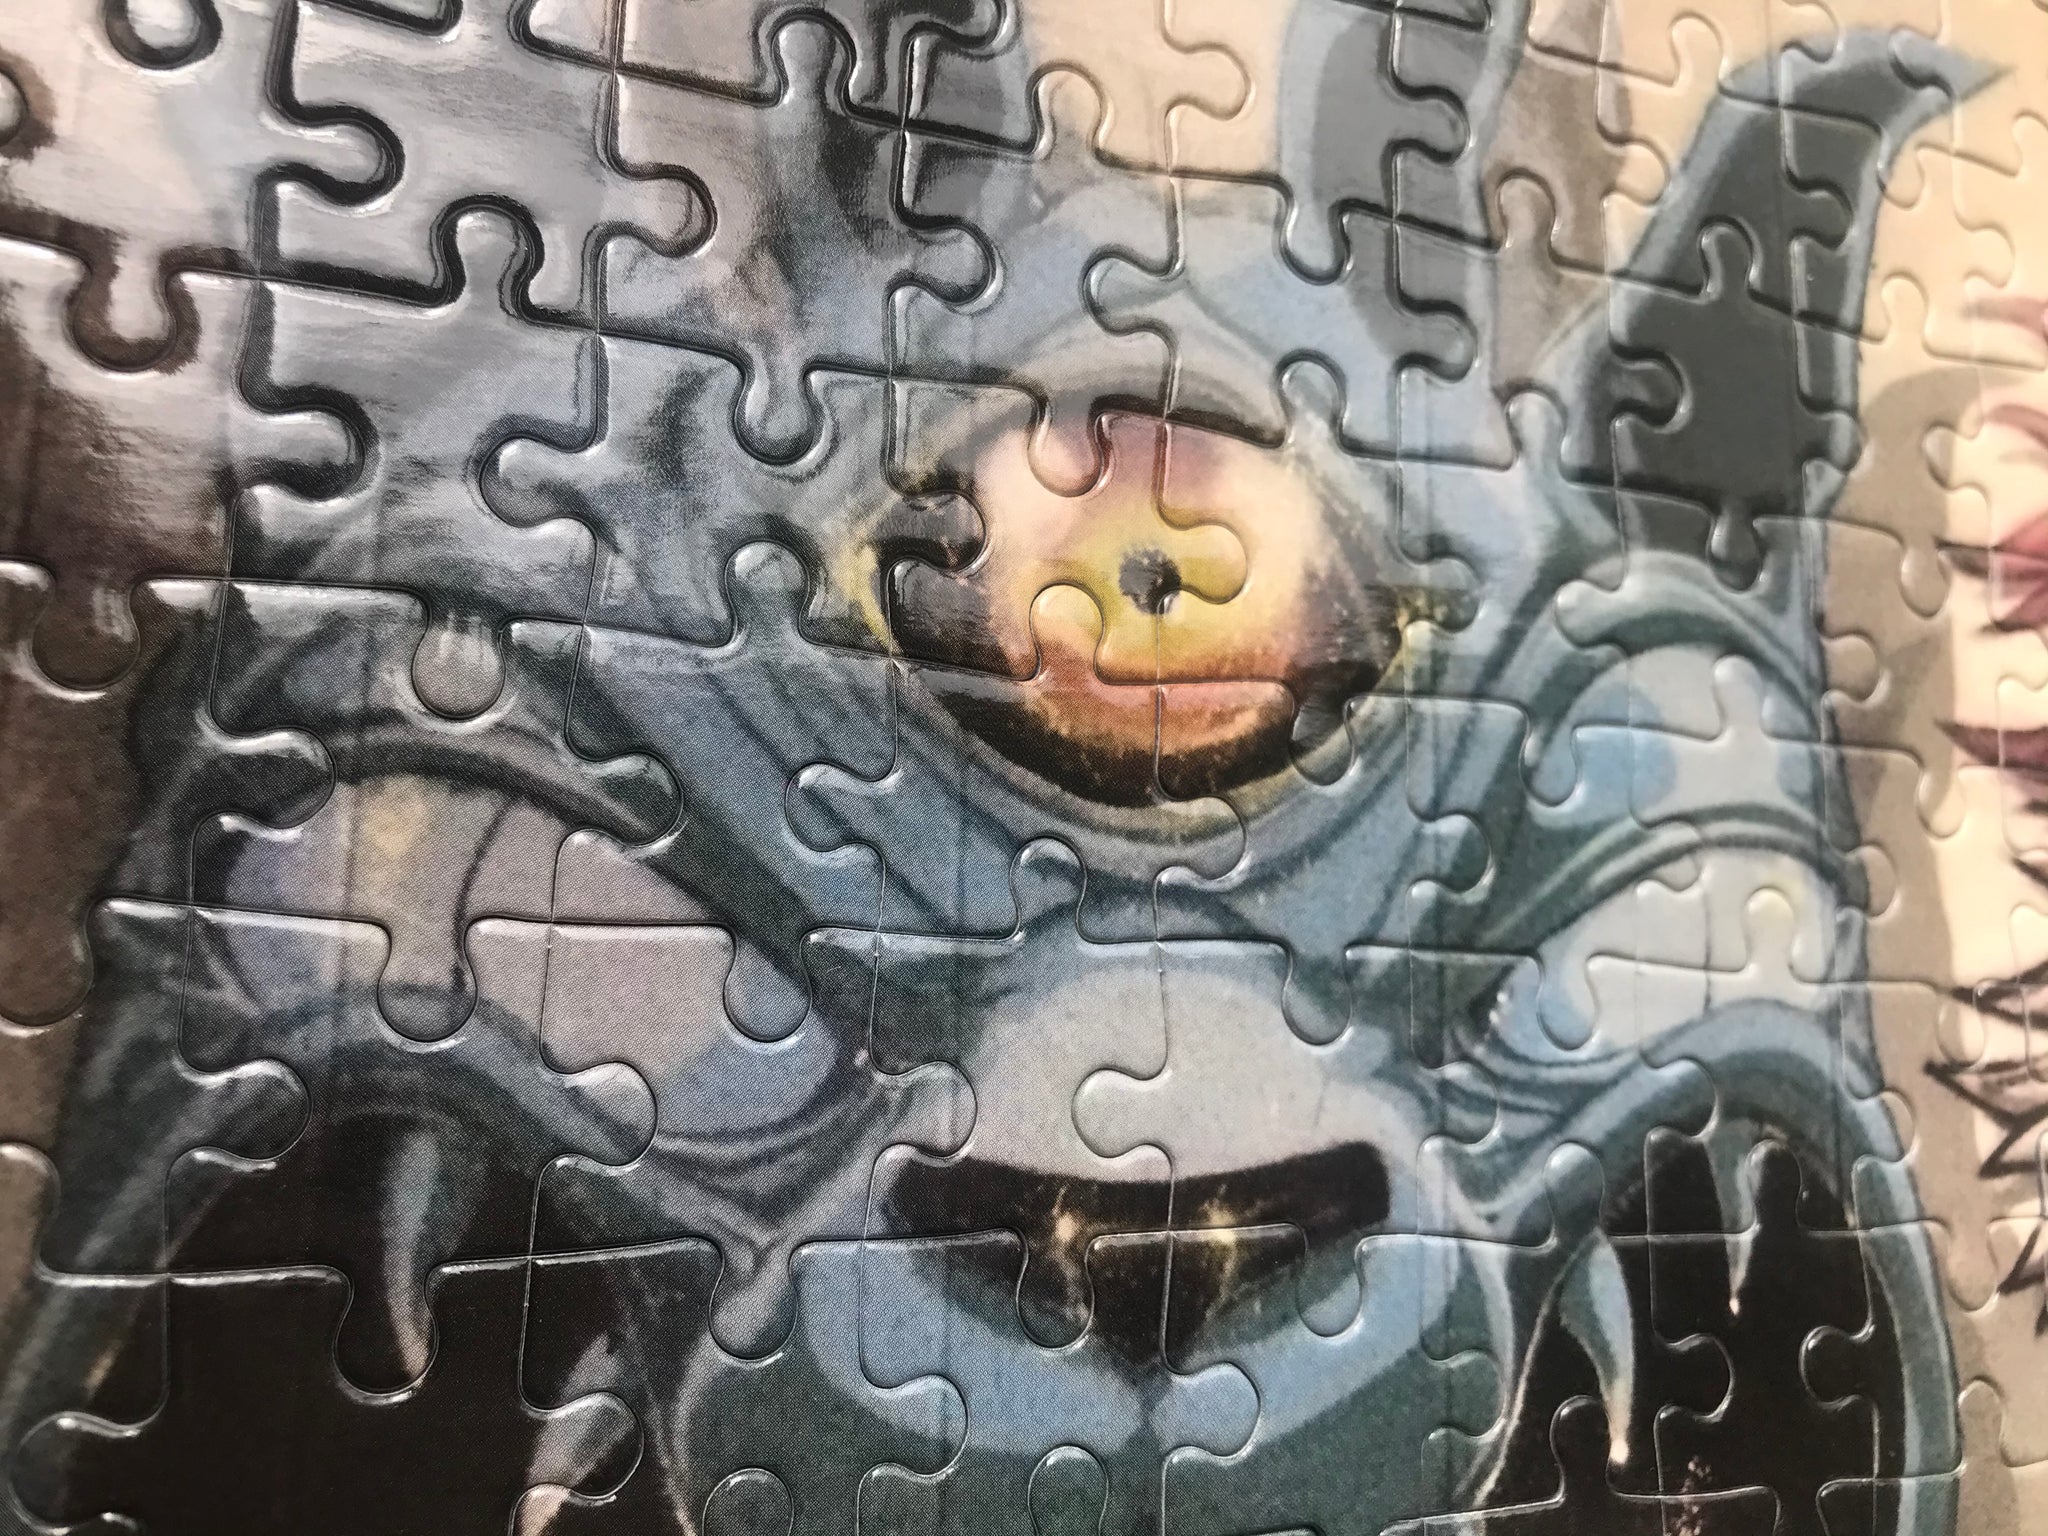 Artist Himbad and Captain Kris Collector Edition Jigsaw Puzzle